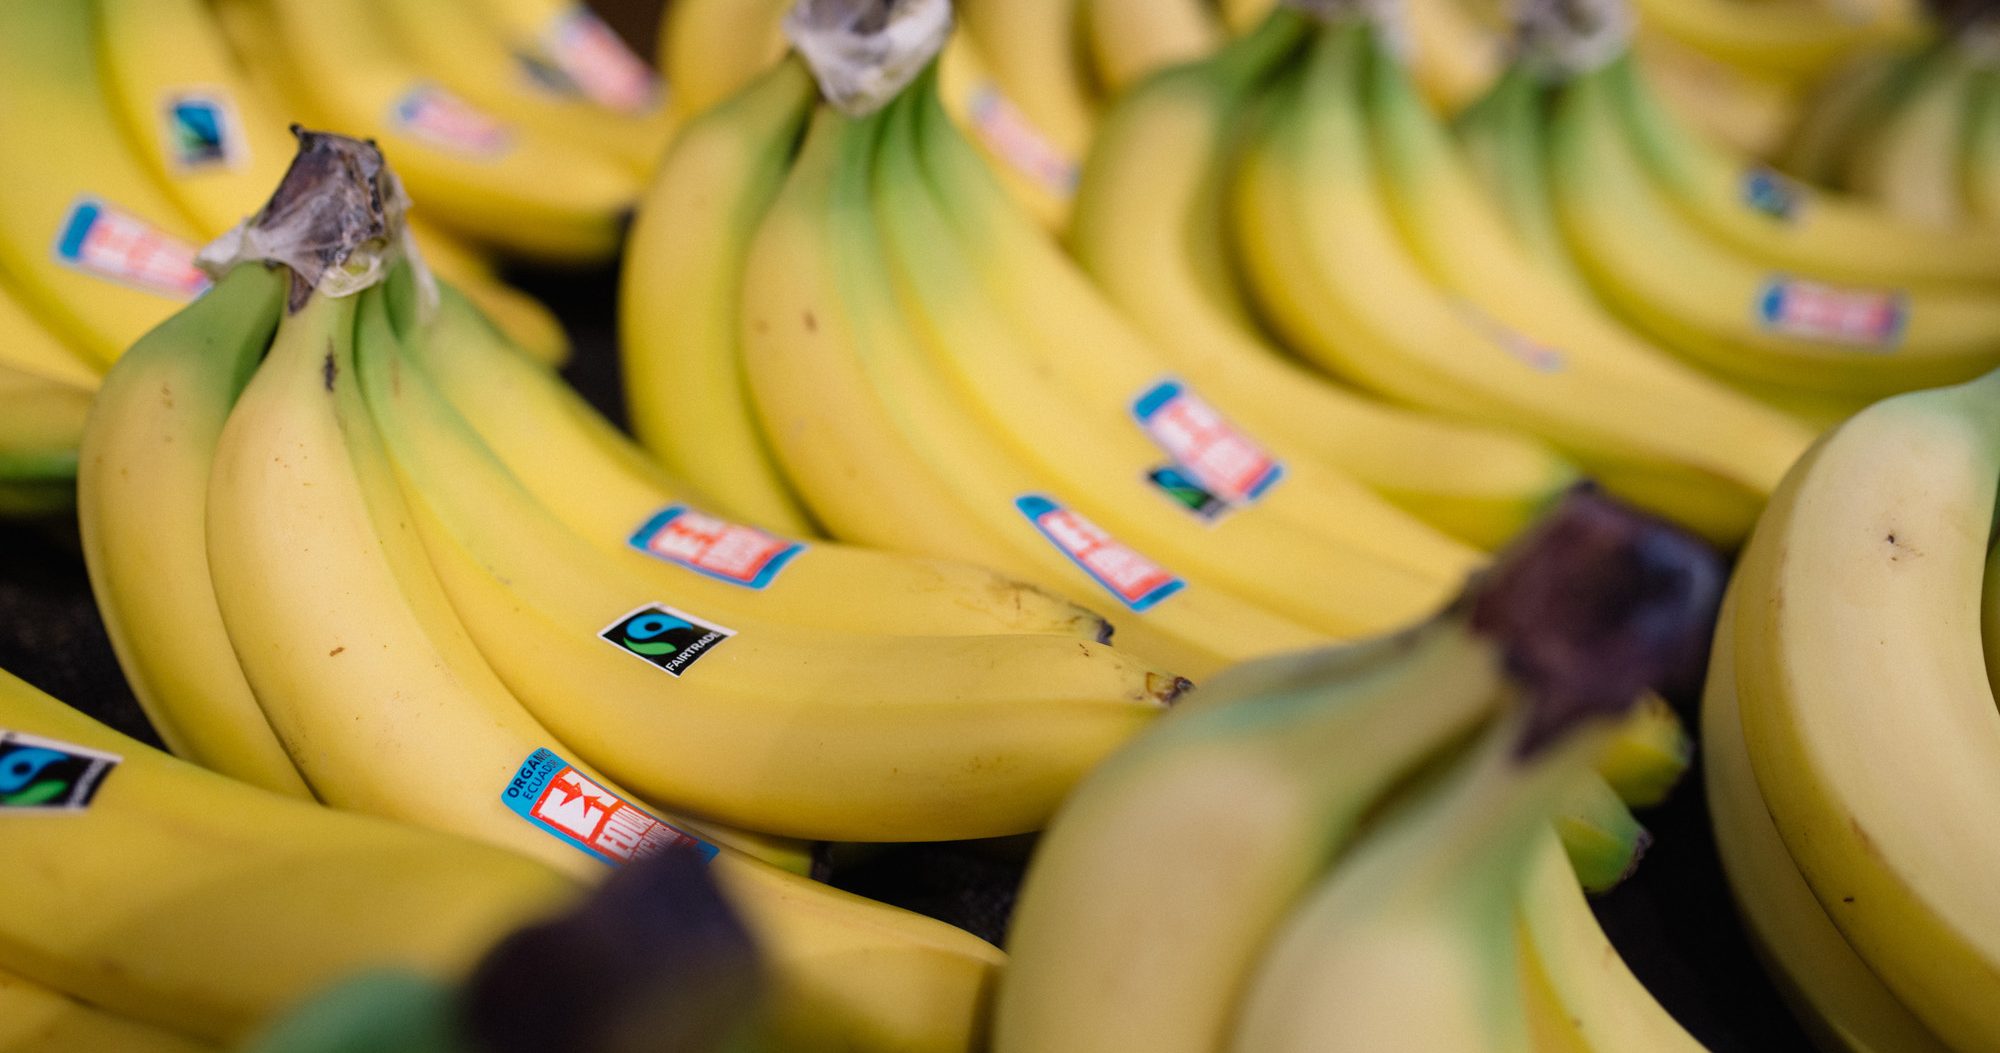 Yellow Fairtrade certified bananas sit in a beautiful produce display.